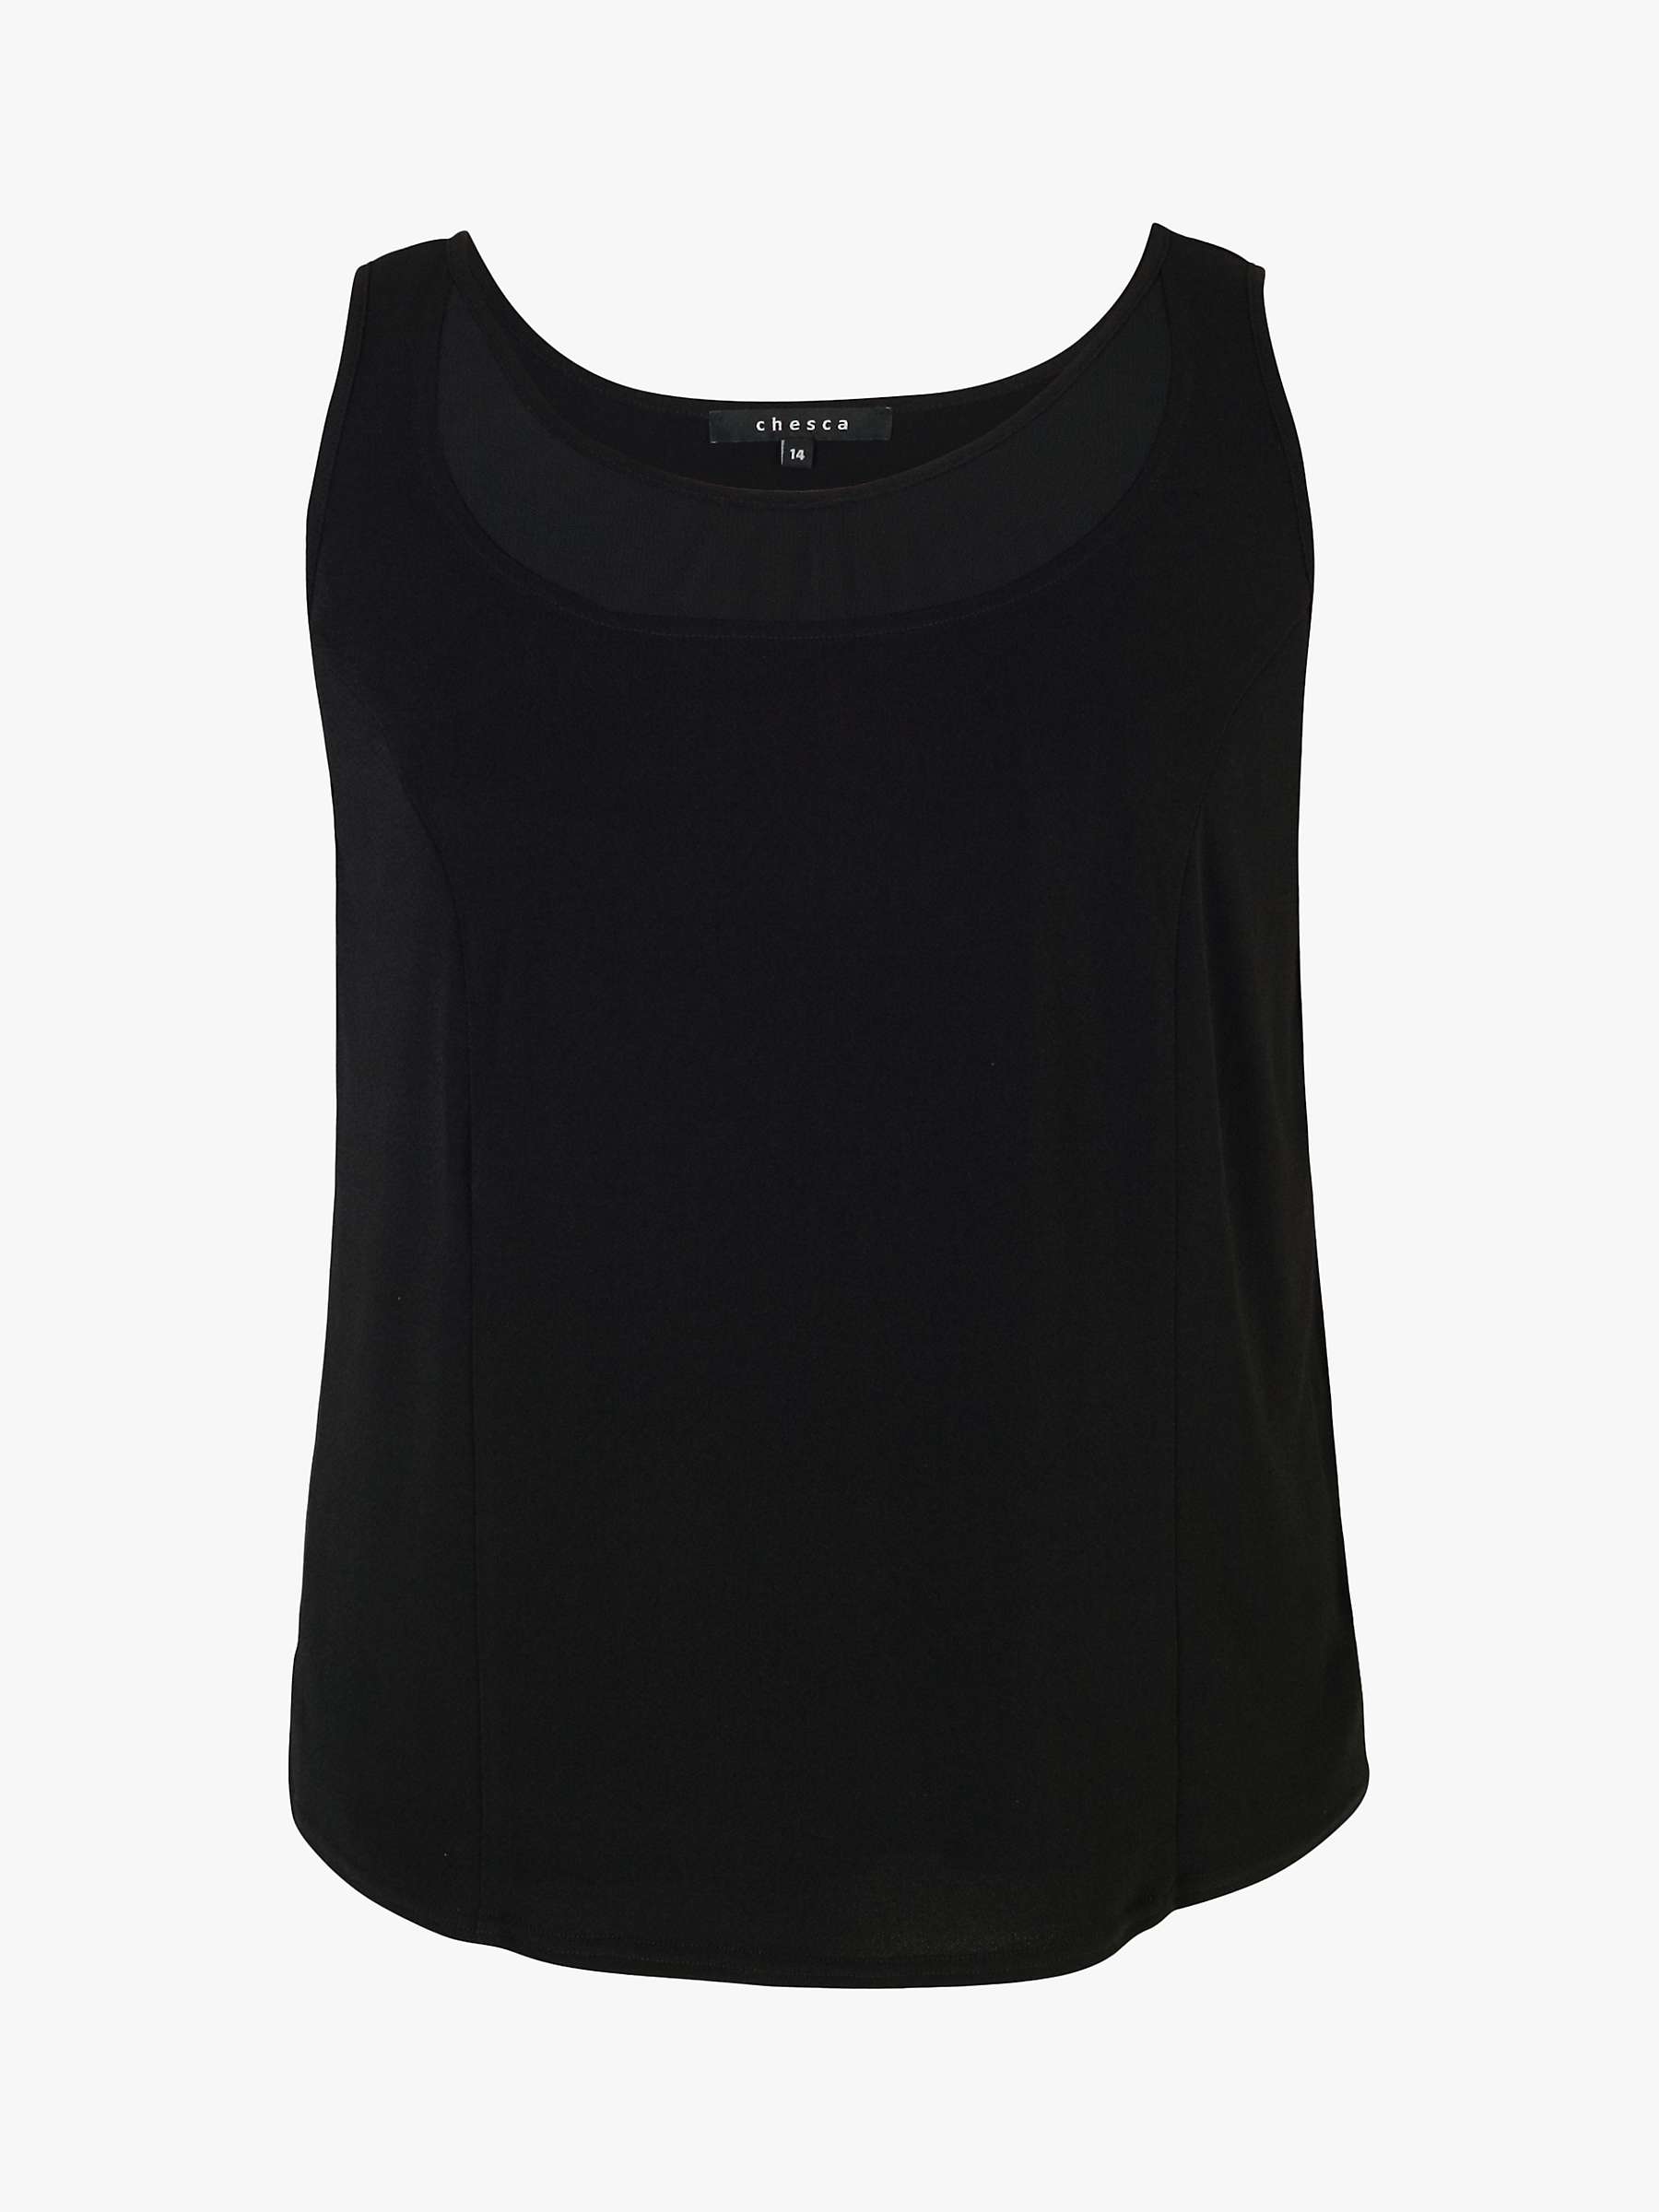 chesca Jersey Cami Top, Black at John Lewis & Partners